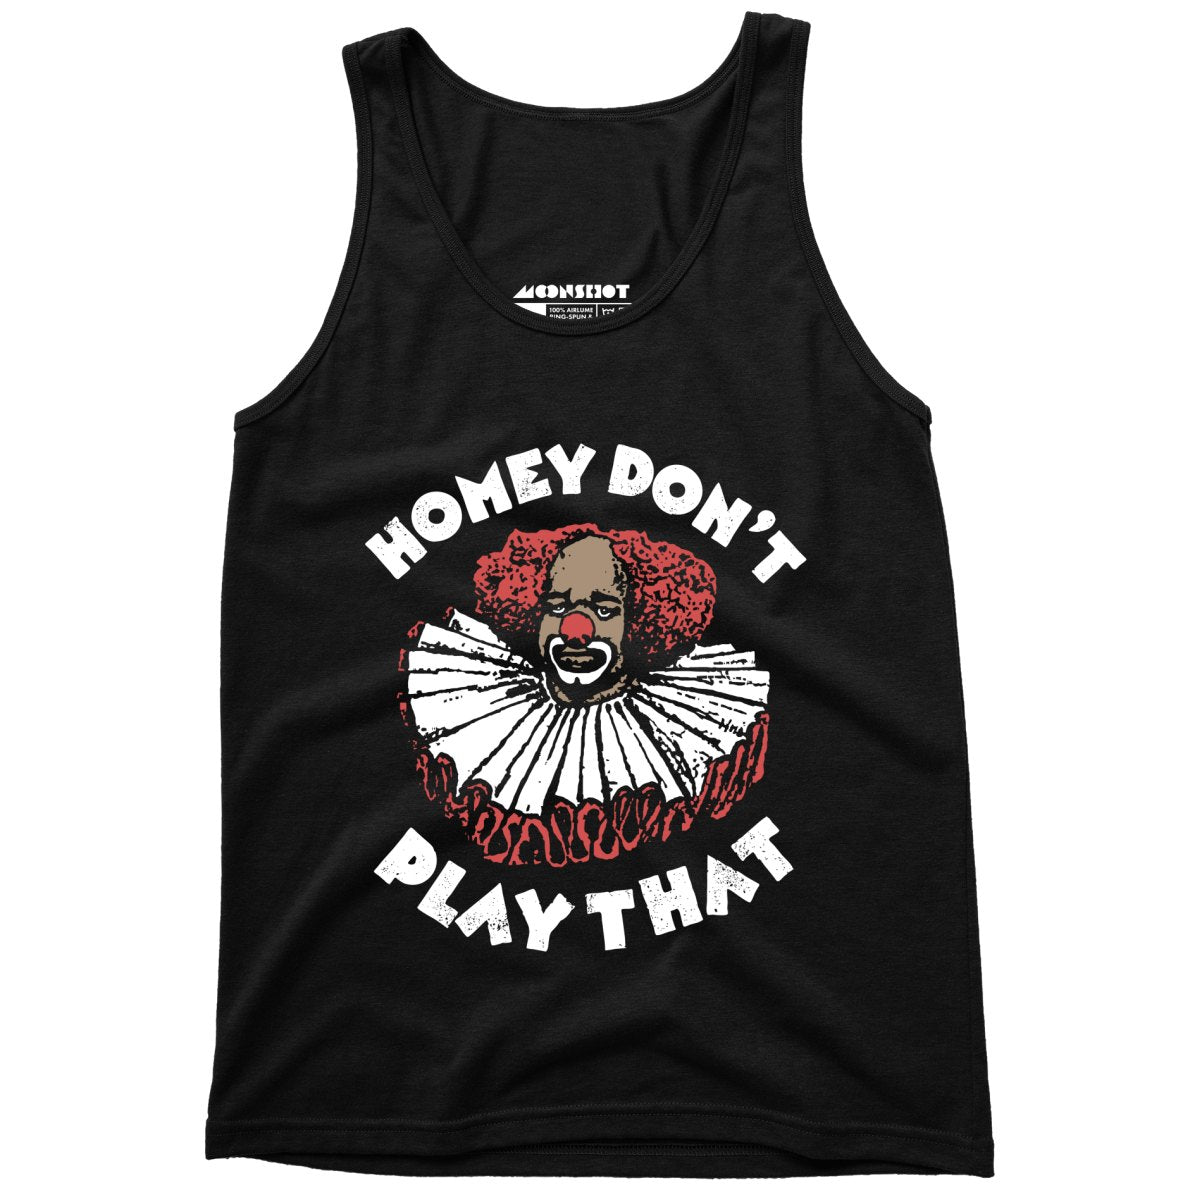 Homey Don't Play That - Unisex Tank Top